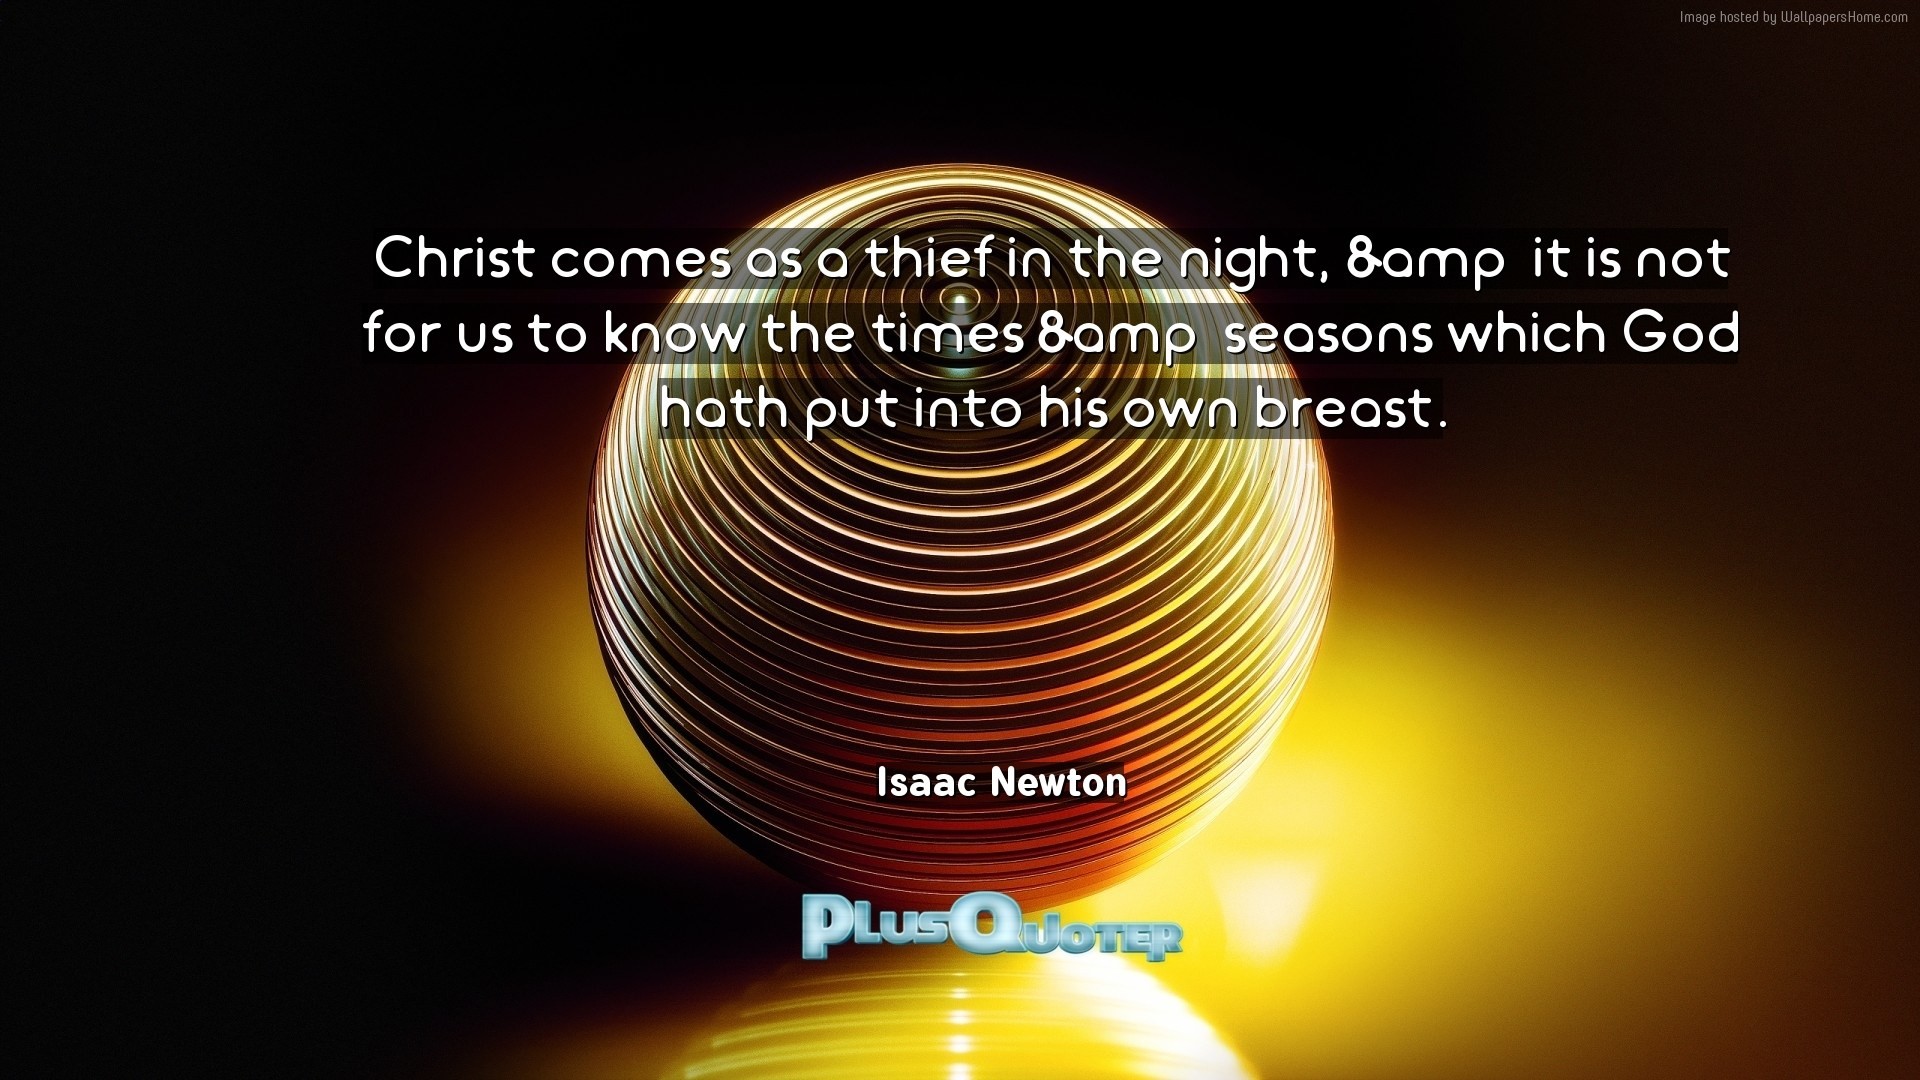 1920x1080 Download Wallpaper with inspirational Quotes- "Christ comes as a thief in  the night,